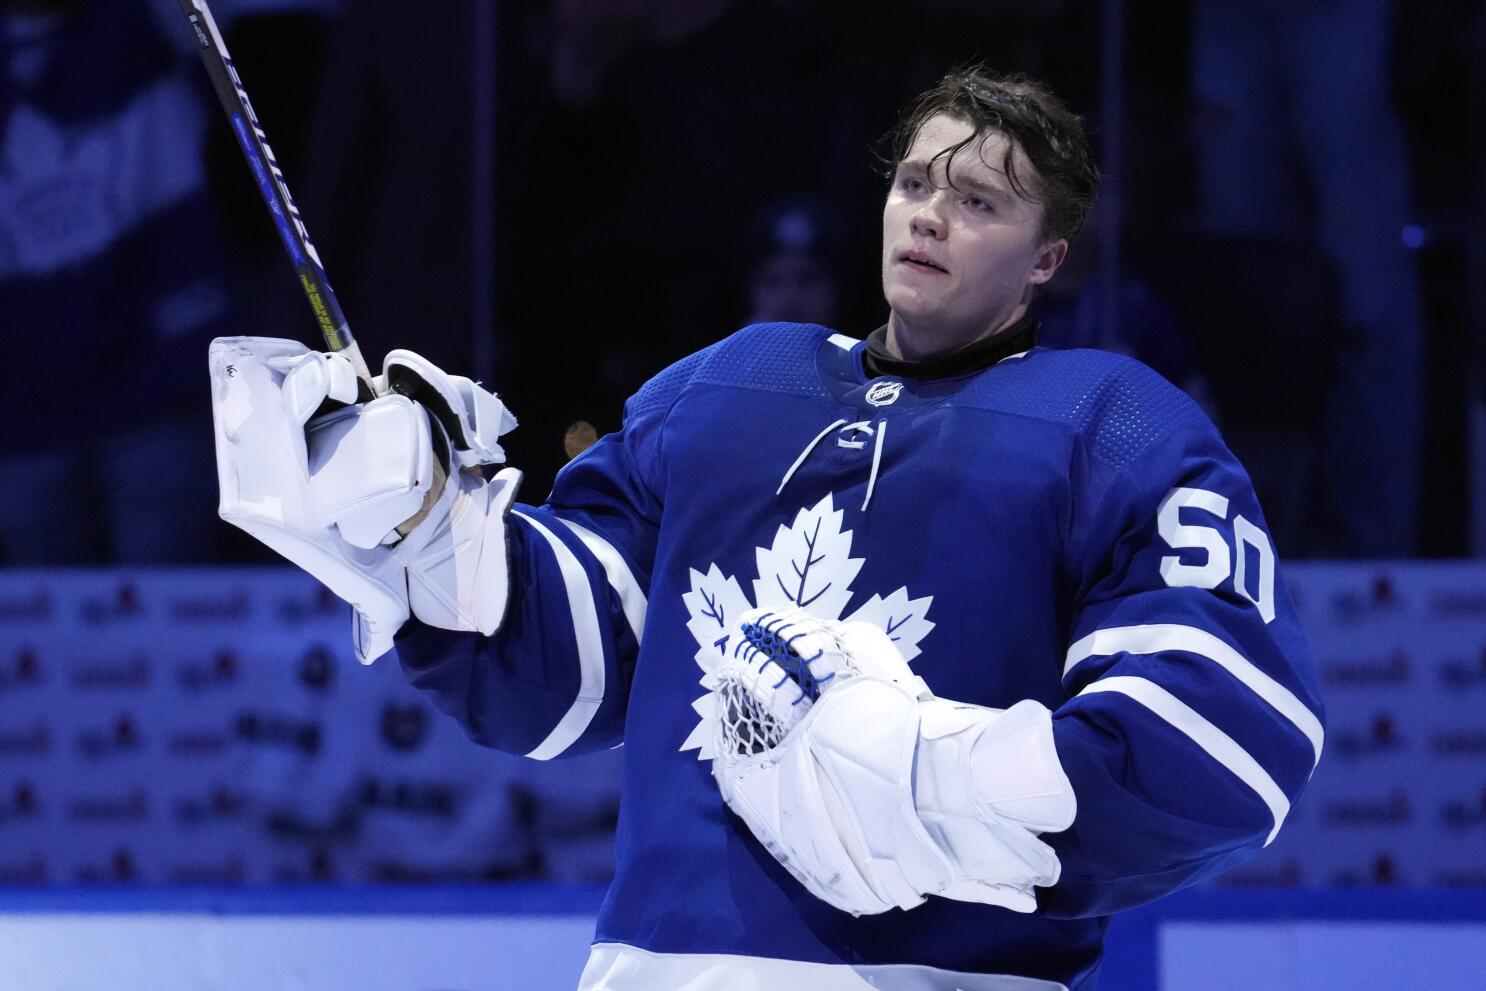 Maple Leafs' Sandin out at least 1 game with neck injury